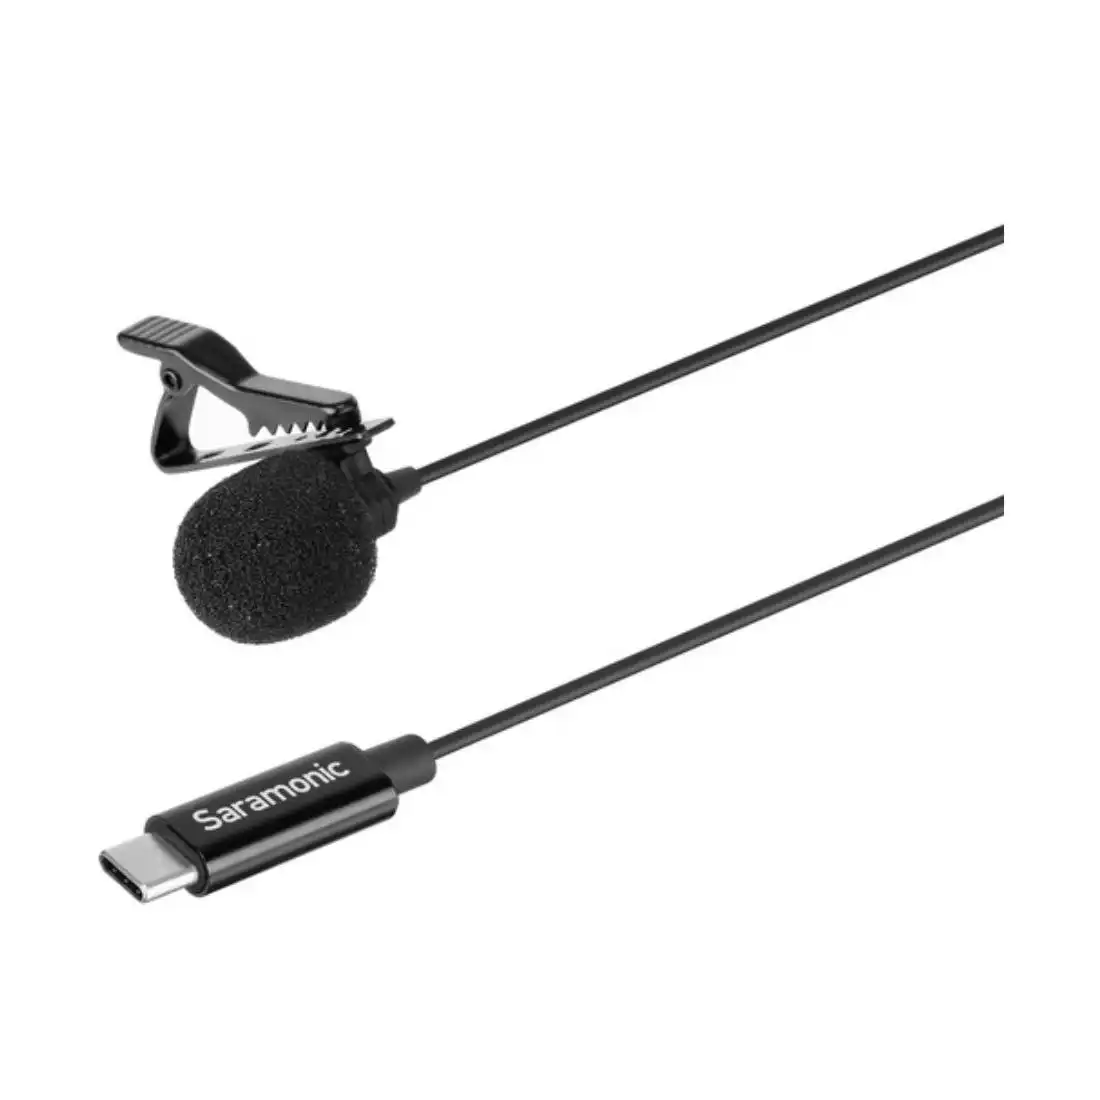 Saramonic LavMicro U3B Omnidirectional Lavalier Microphone wi USB-C Connector for Android Devices